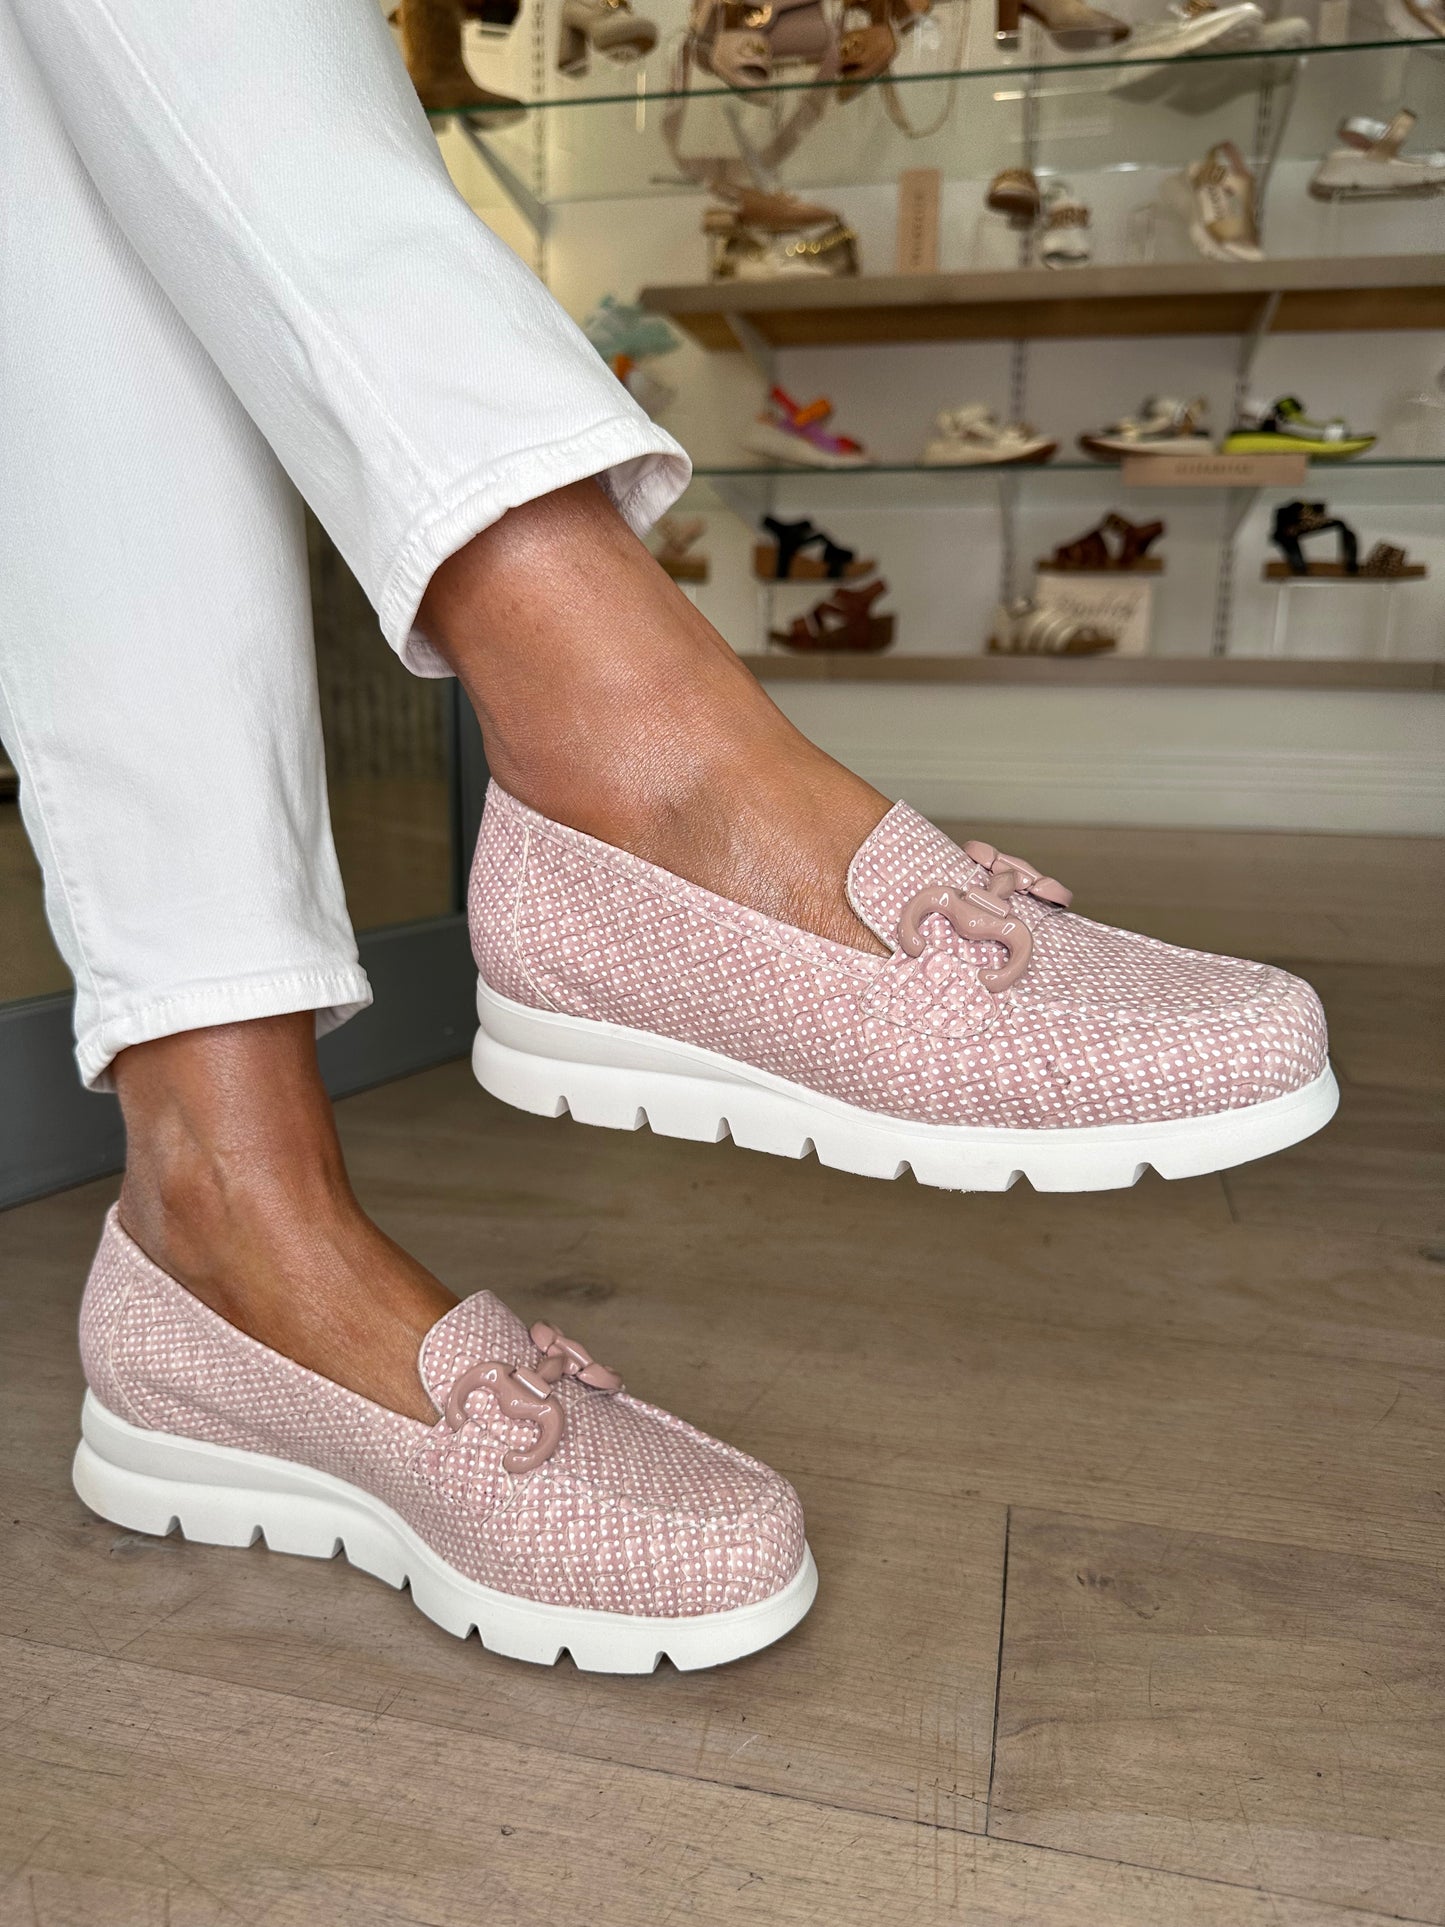 Dchicas (By Viguera) - Soft Pink/ White Print Slip On Sporty Shoe